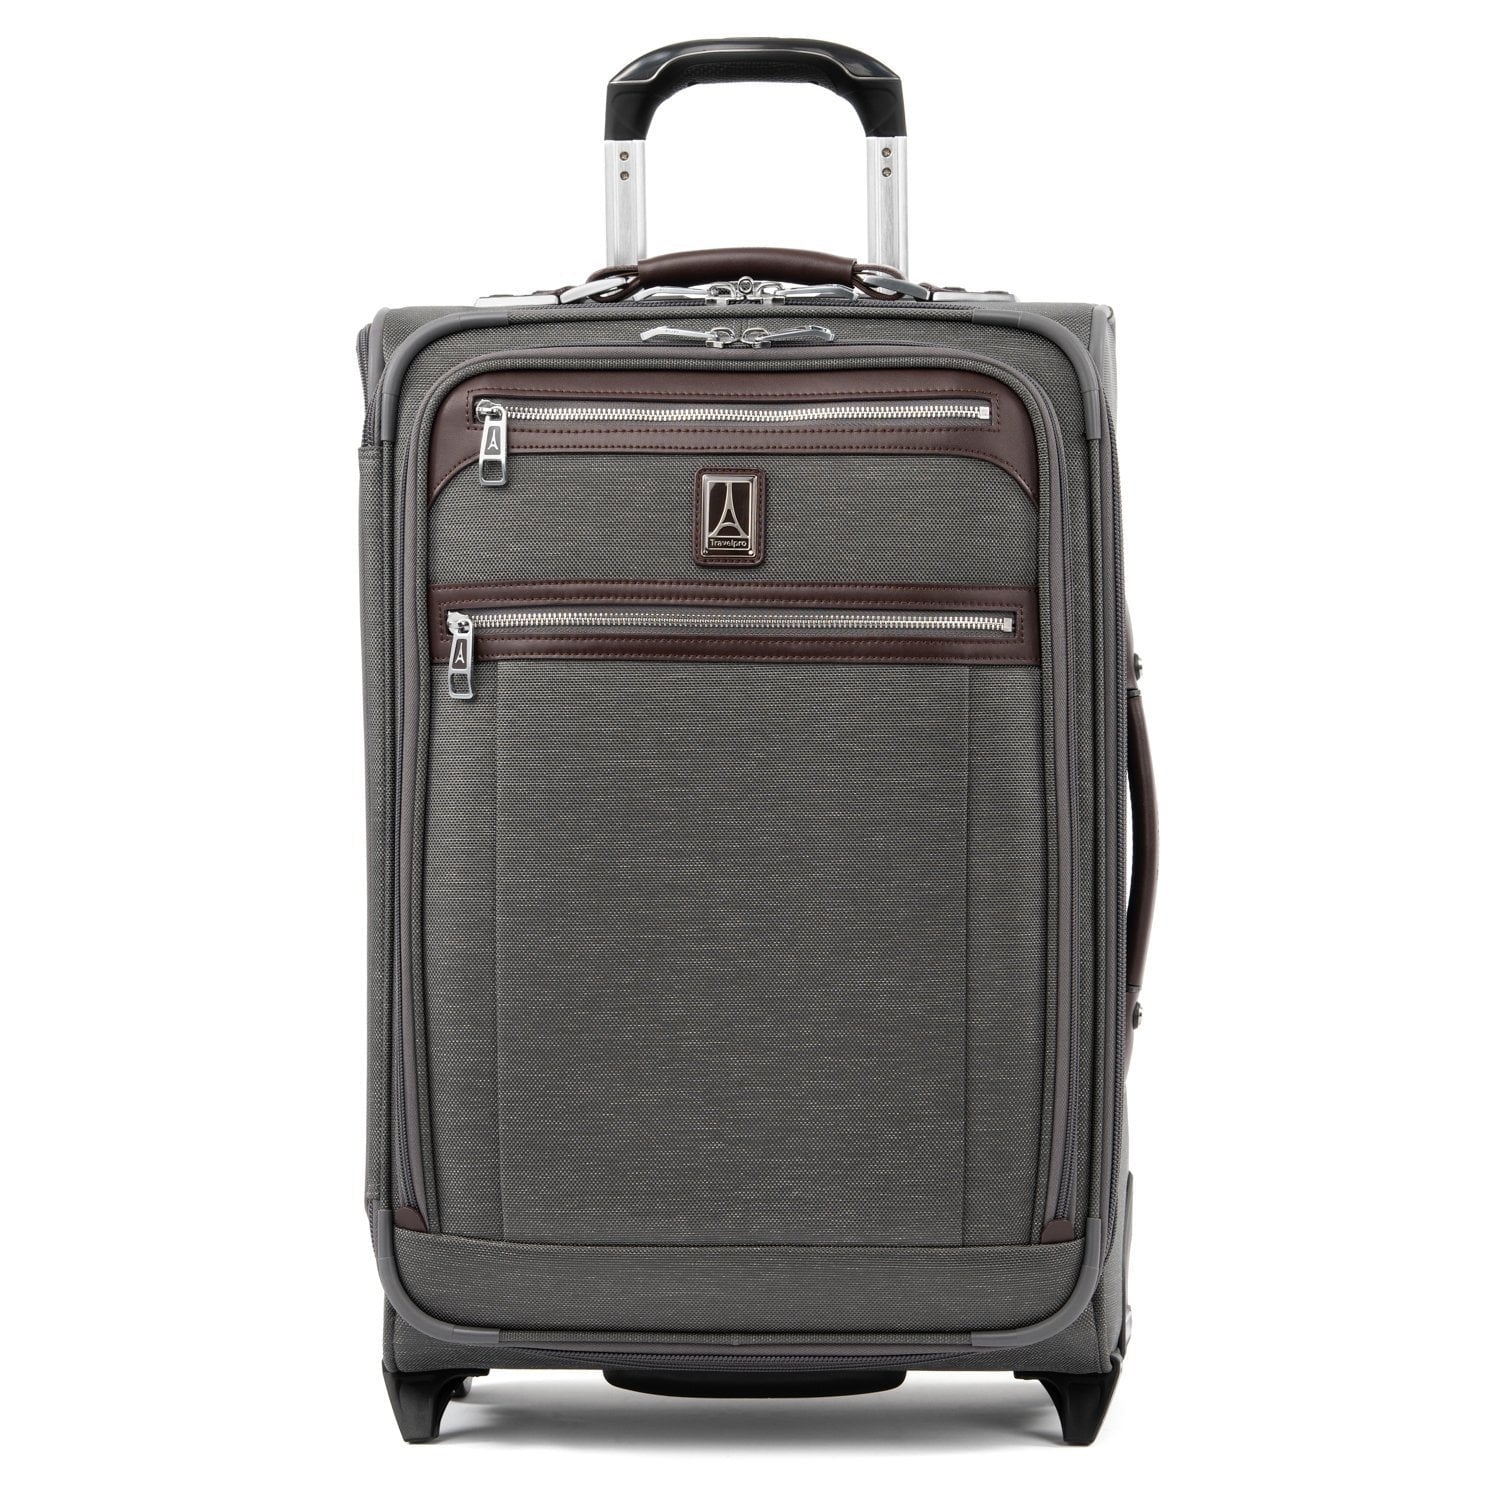 Travelpro Platinum Elite 22 Inch Expandable Carry-On Rollaboard Luggage Grey